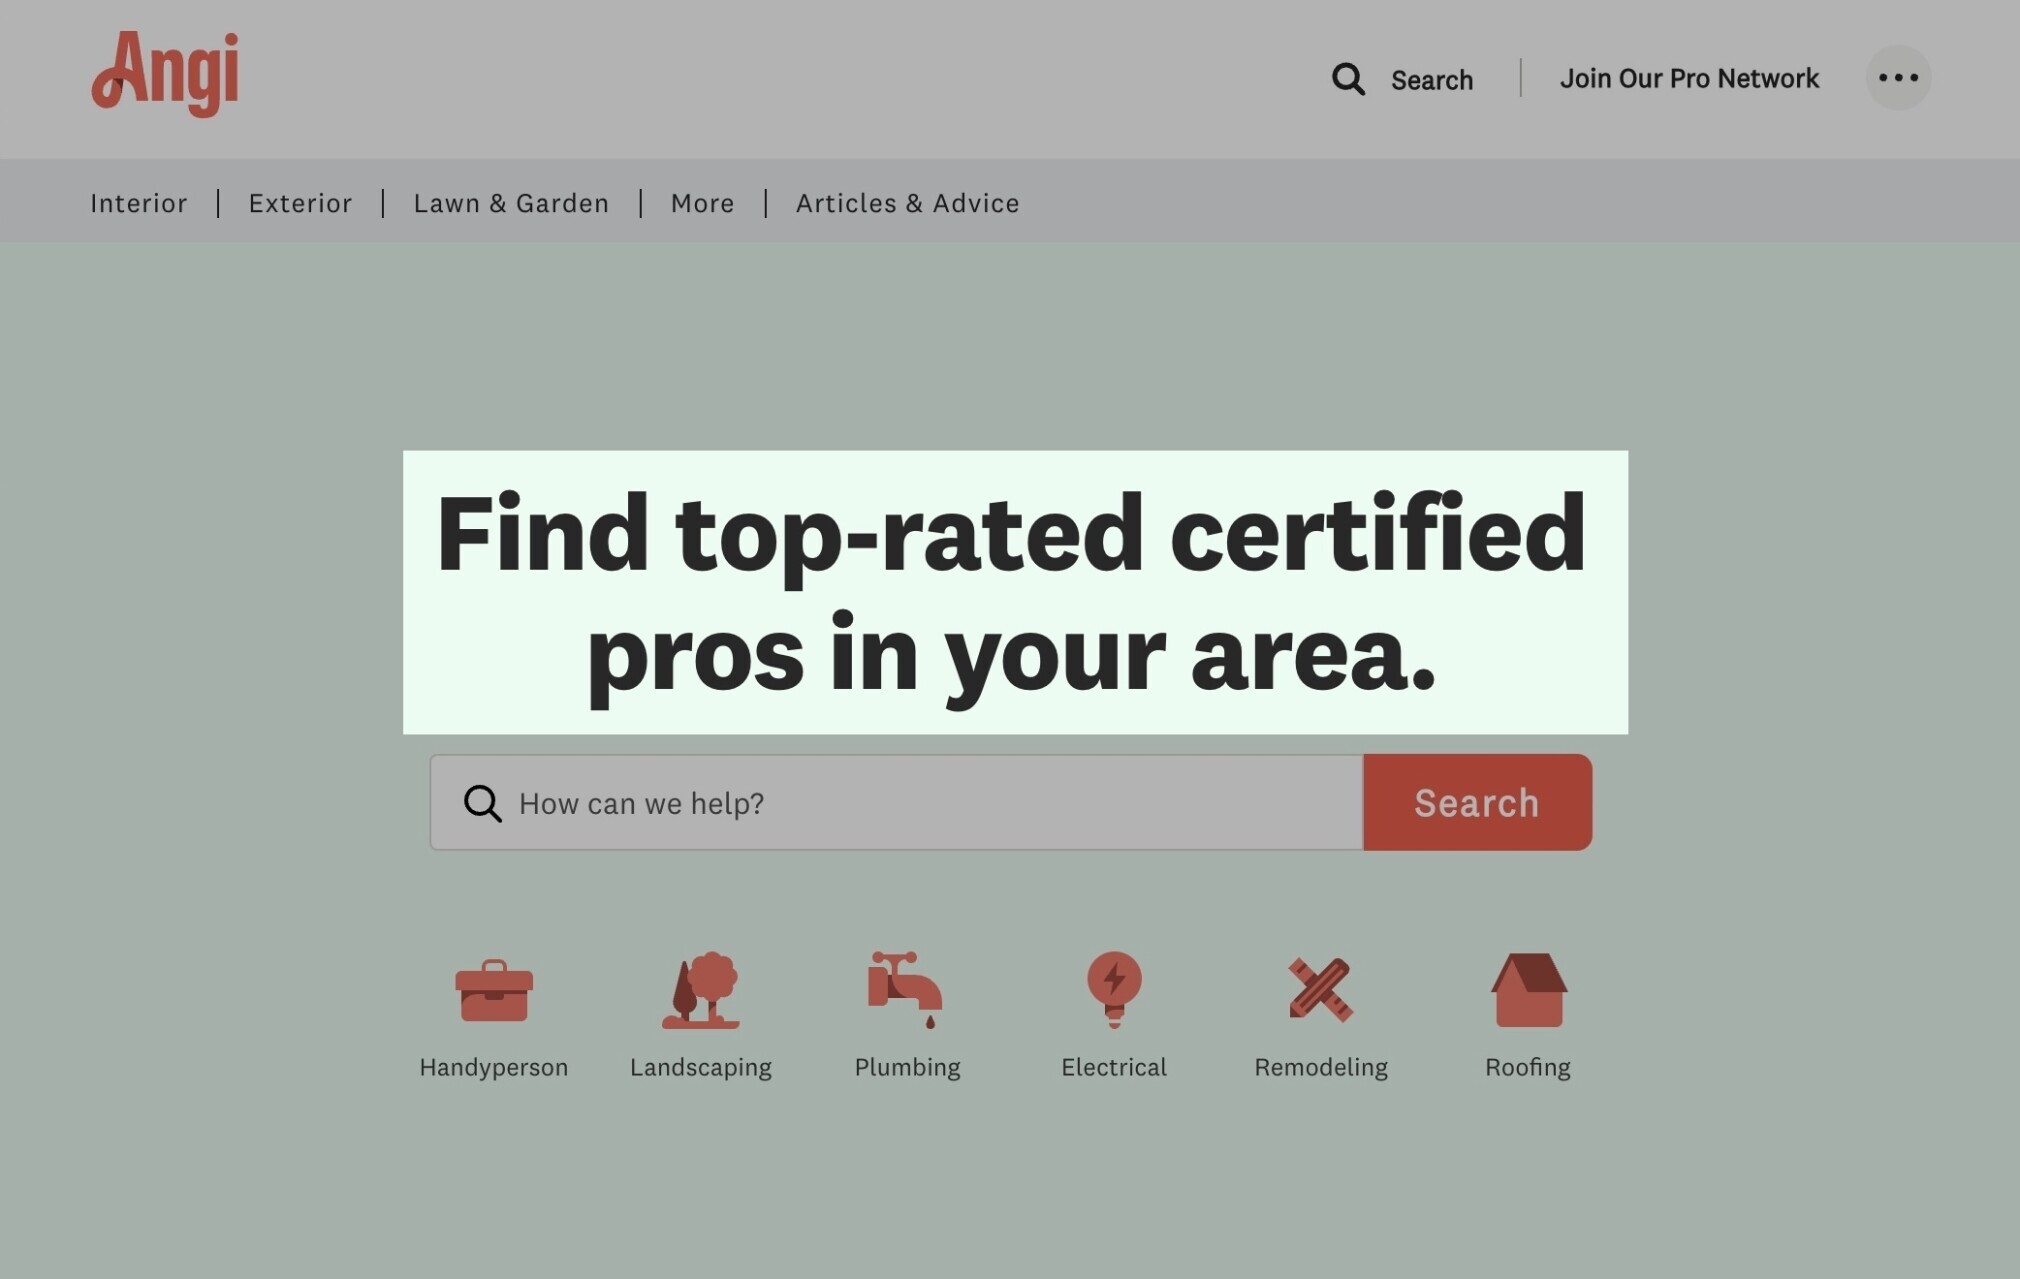 Angi's landing page with the headline: "Find top-rated certified pros in your area."